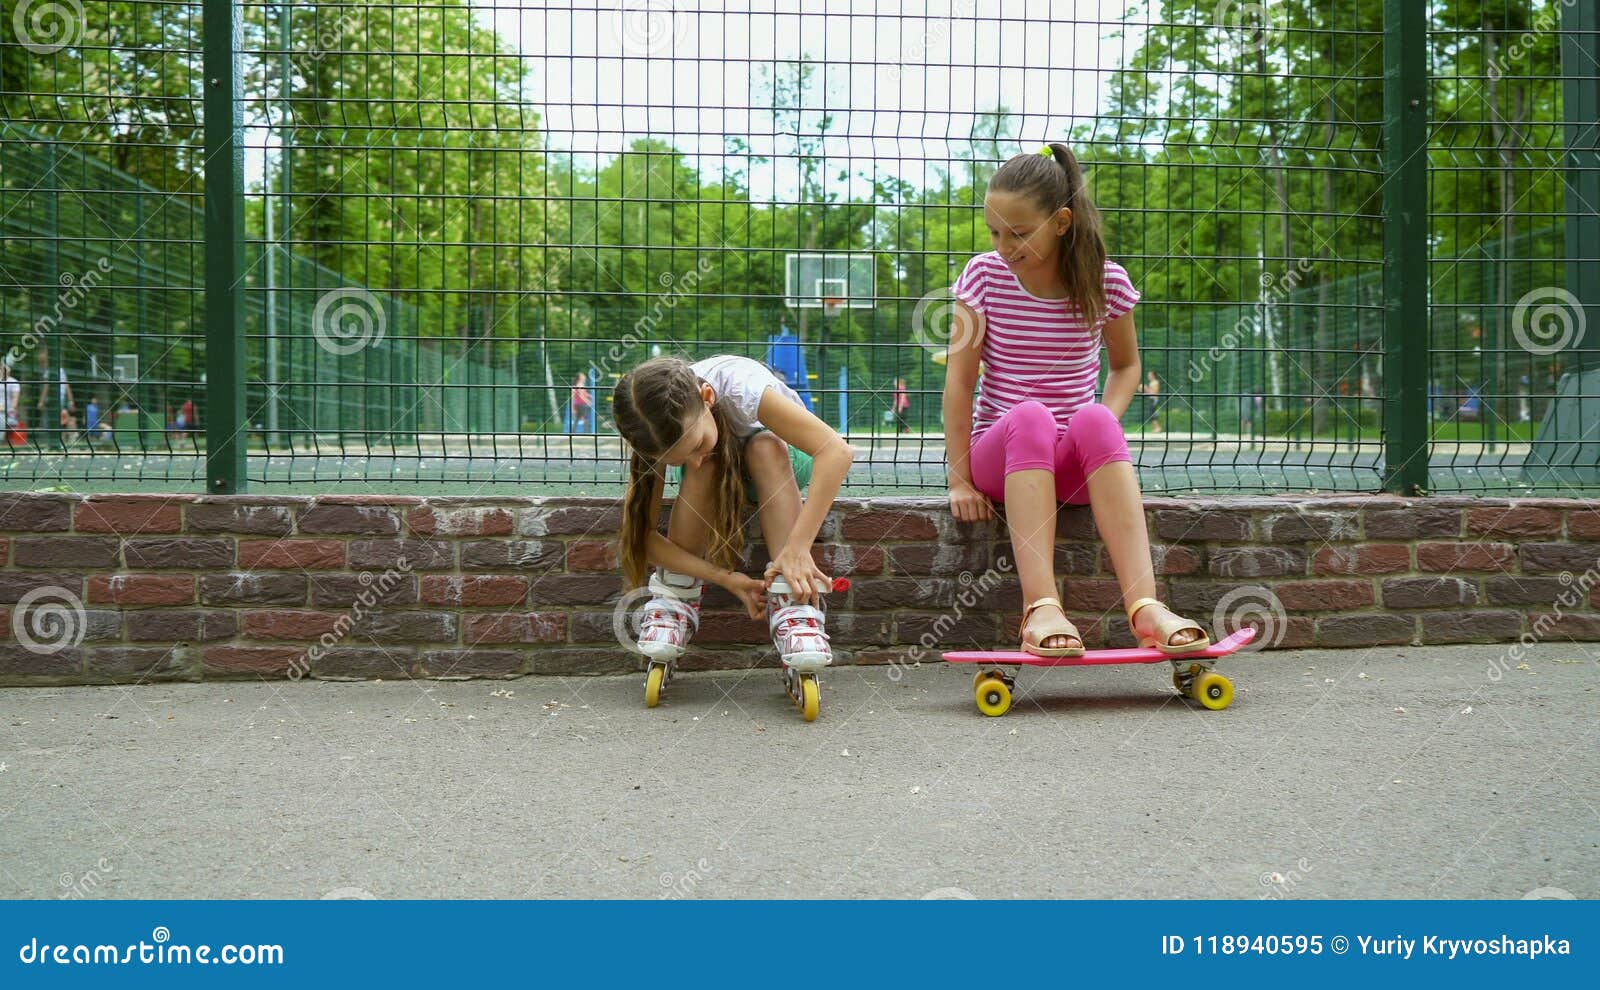 two girls active passtime in park